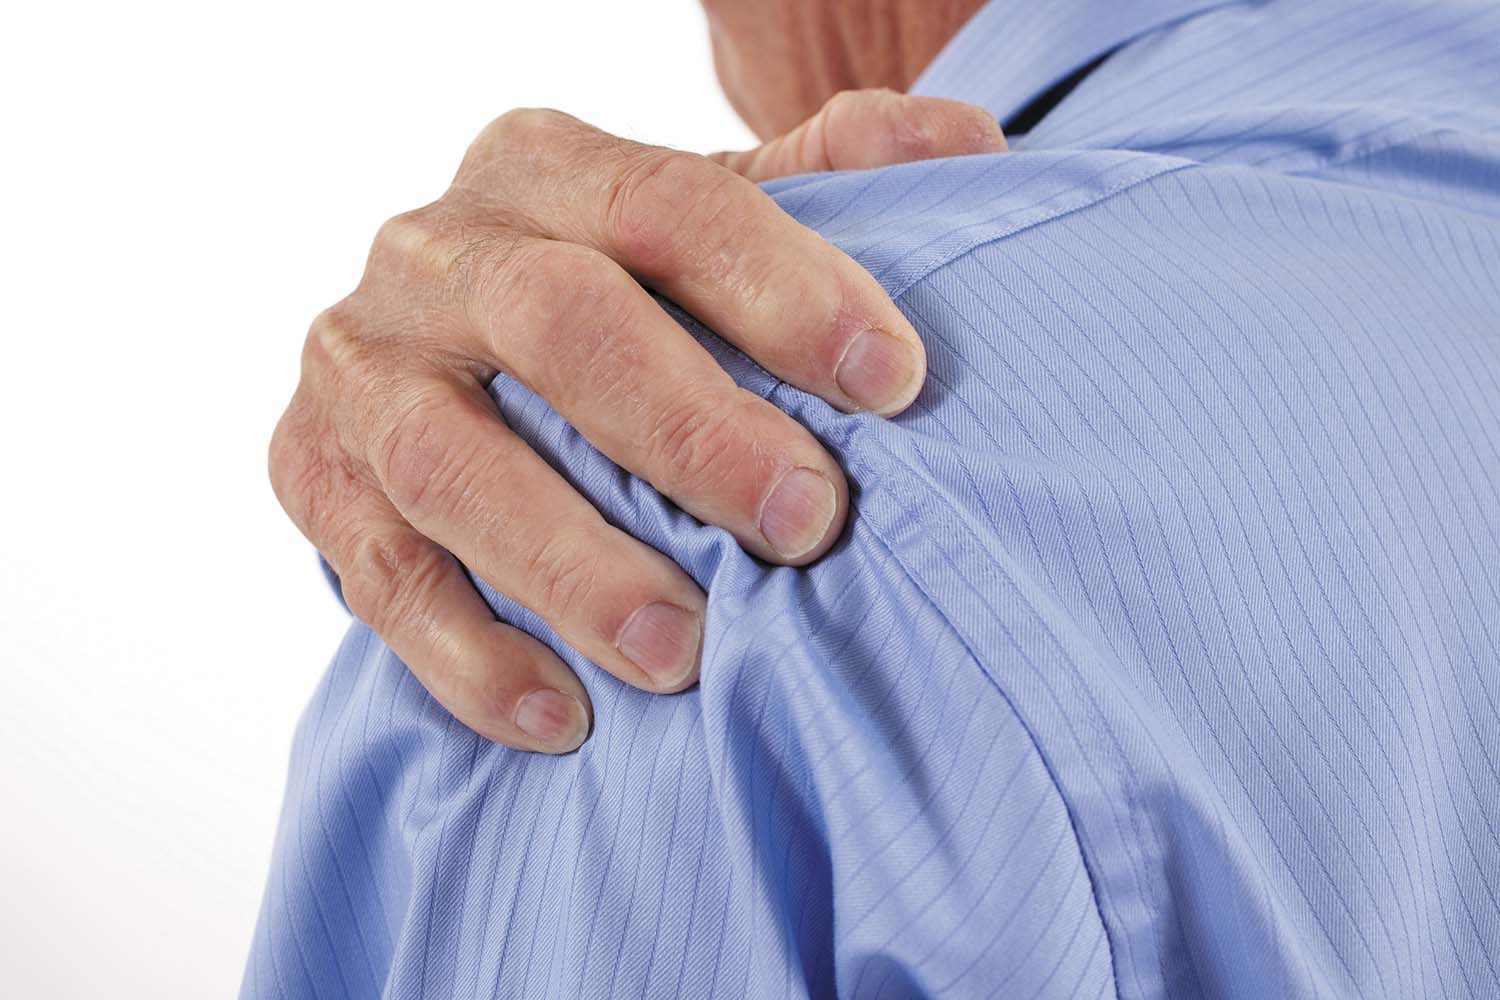 close-up photo of a man viewed from behind holding his hand on his sore shoulder